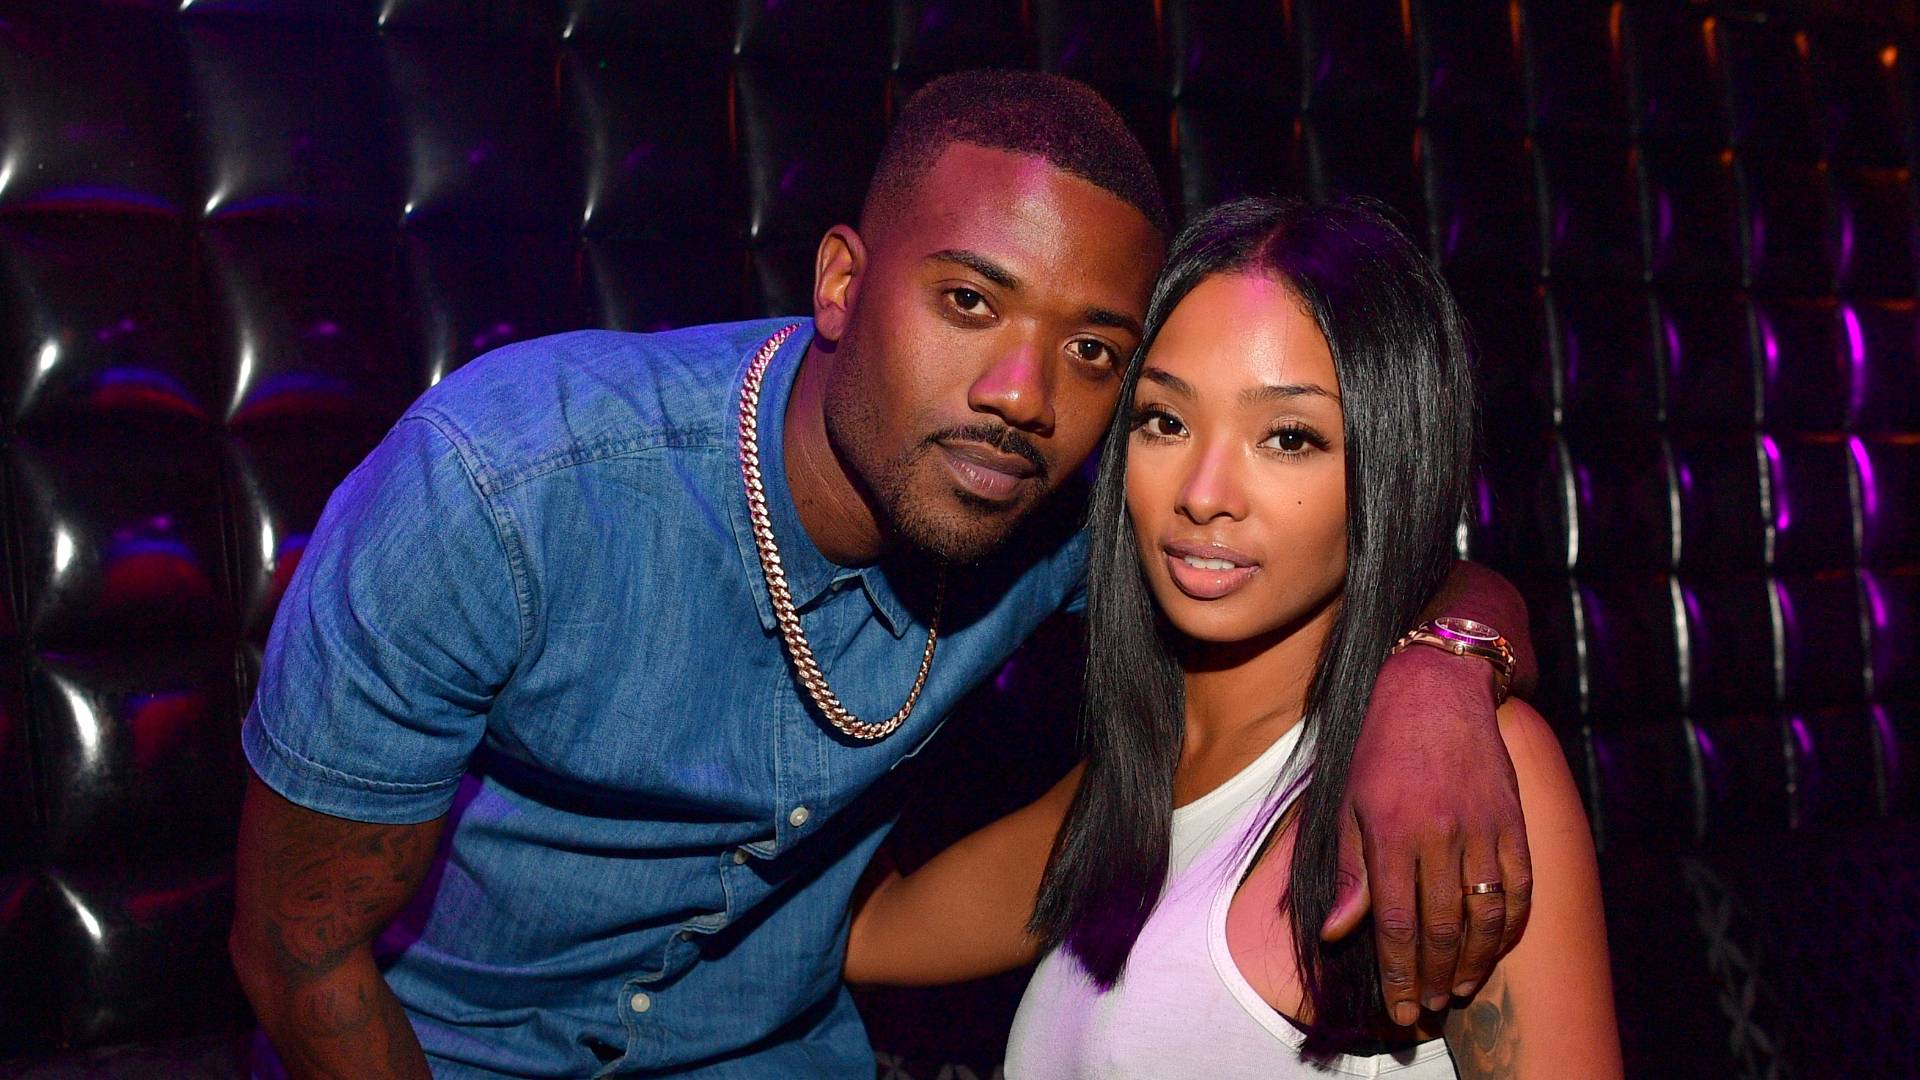  Ray J and Princess Love attend a Hairshow After party at Medusa on August 21, 2016 in Atlanta, Georgia. 